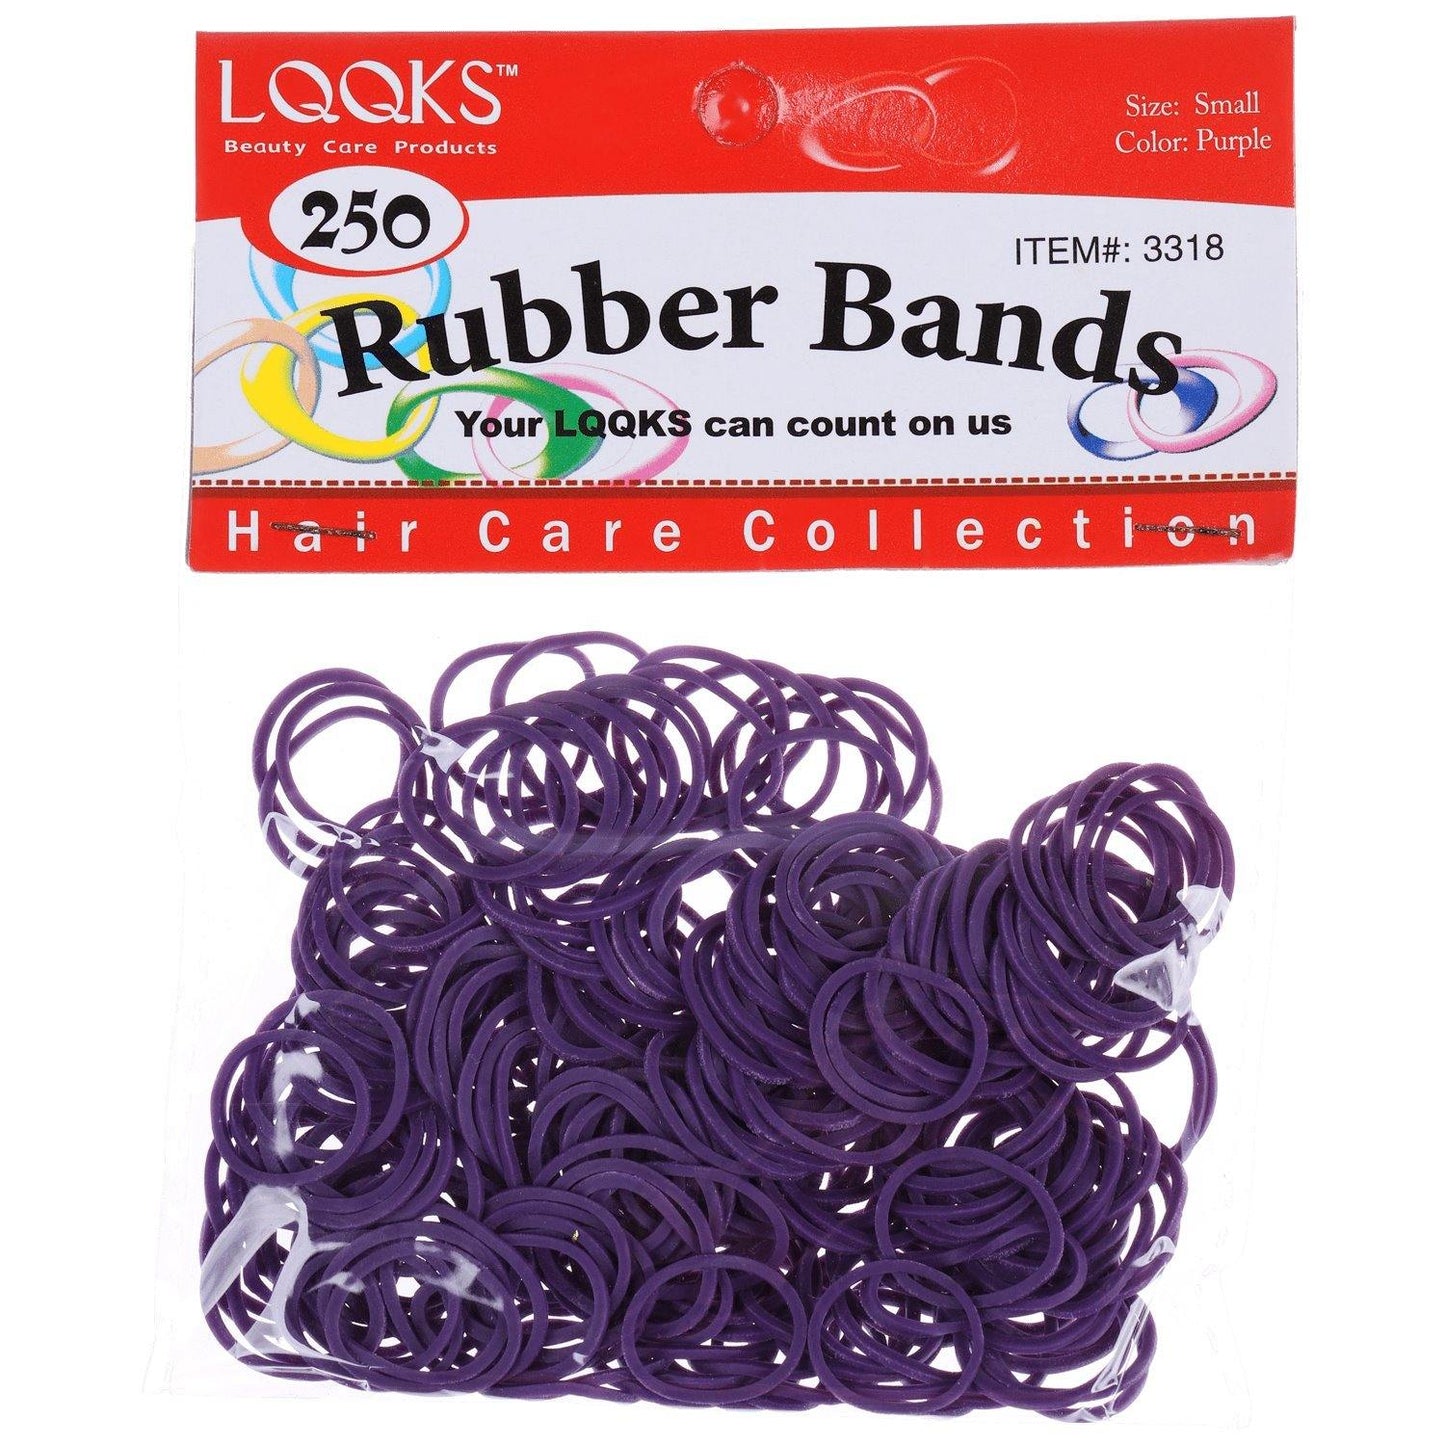 Colored Rubber bands-Small size, 500 count (2 packs of 250 )- Multiple Colors Available - True Elegance Beauty Supply